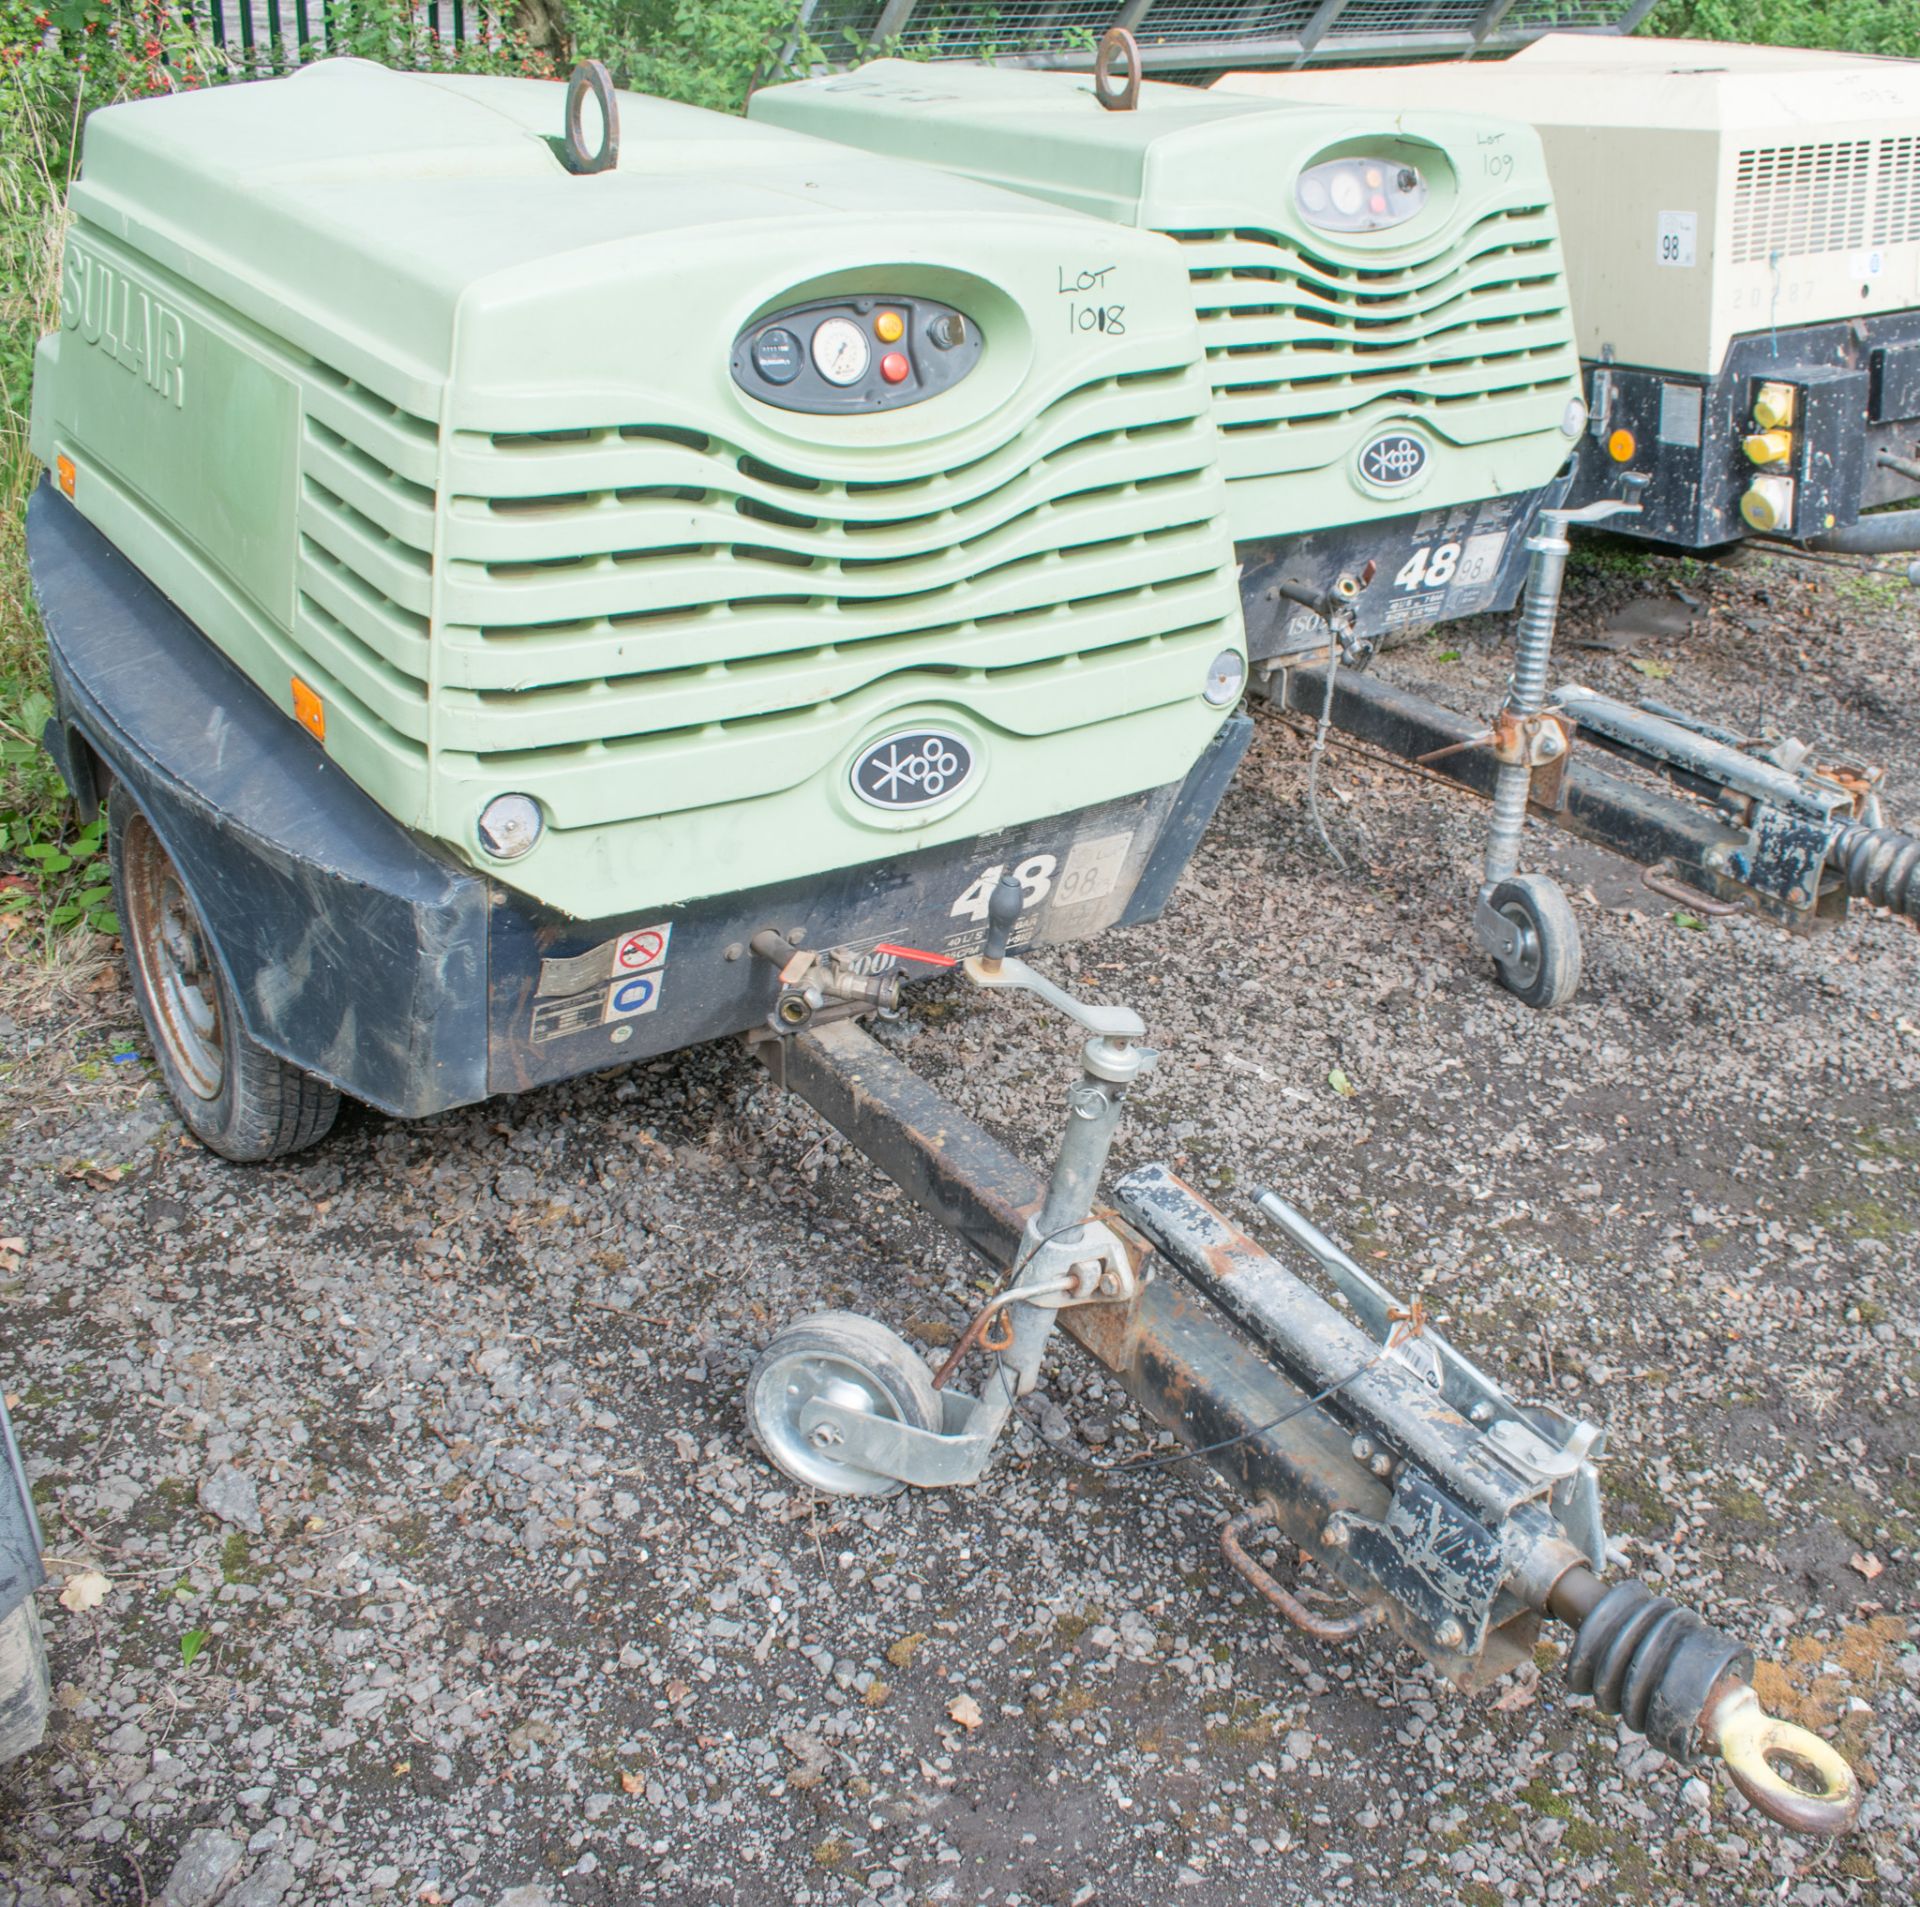 SULLAIR 48K diesel driven mobile air compressor Year: 2007 S/N: 348805 Recorded hours: 957 1016